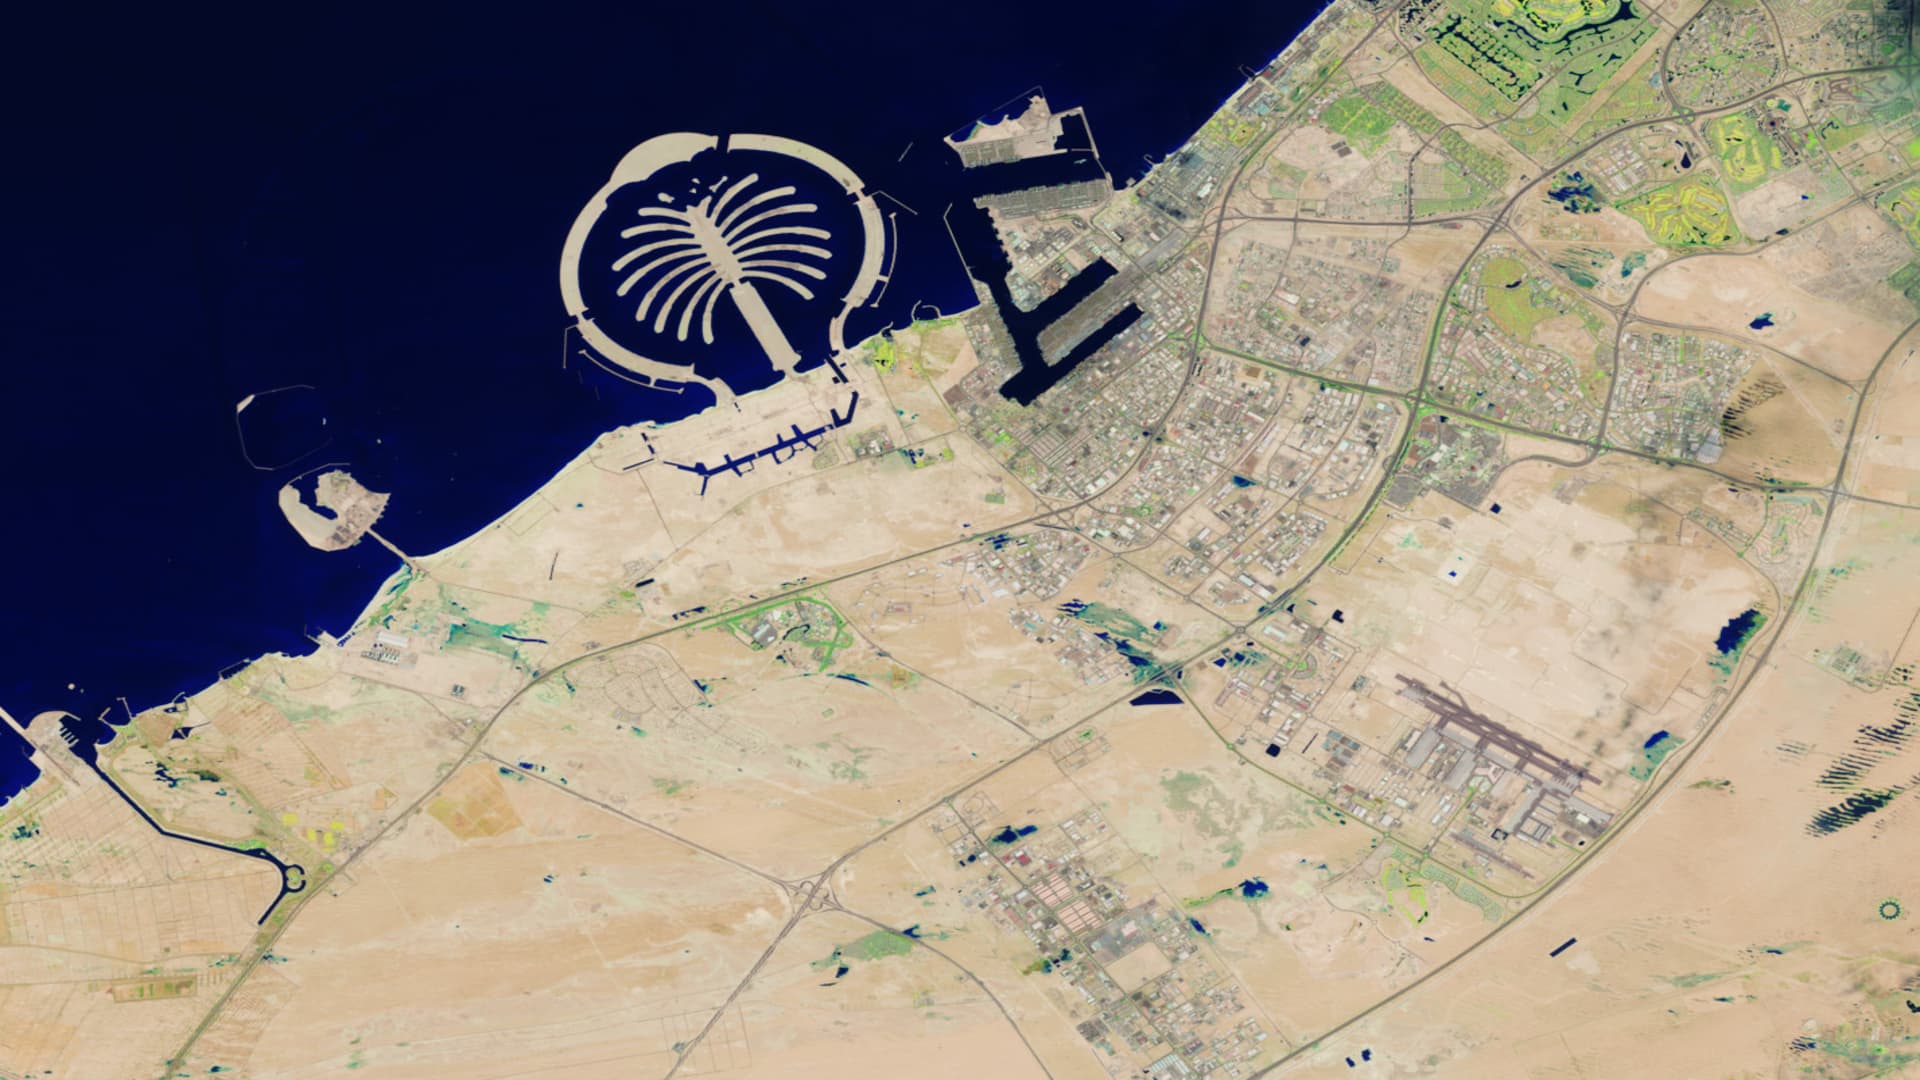 Satellite photo of part of Dubai on April 3, taken by Landsat 9, an earth observation satellite operated by a partnership between the U.S. Geological Survey (USGS) and the National Aeronautics and Space Administration (NASA).